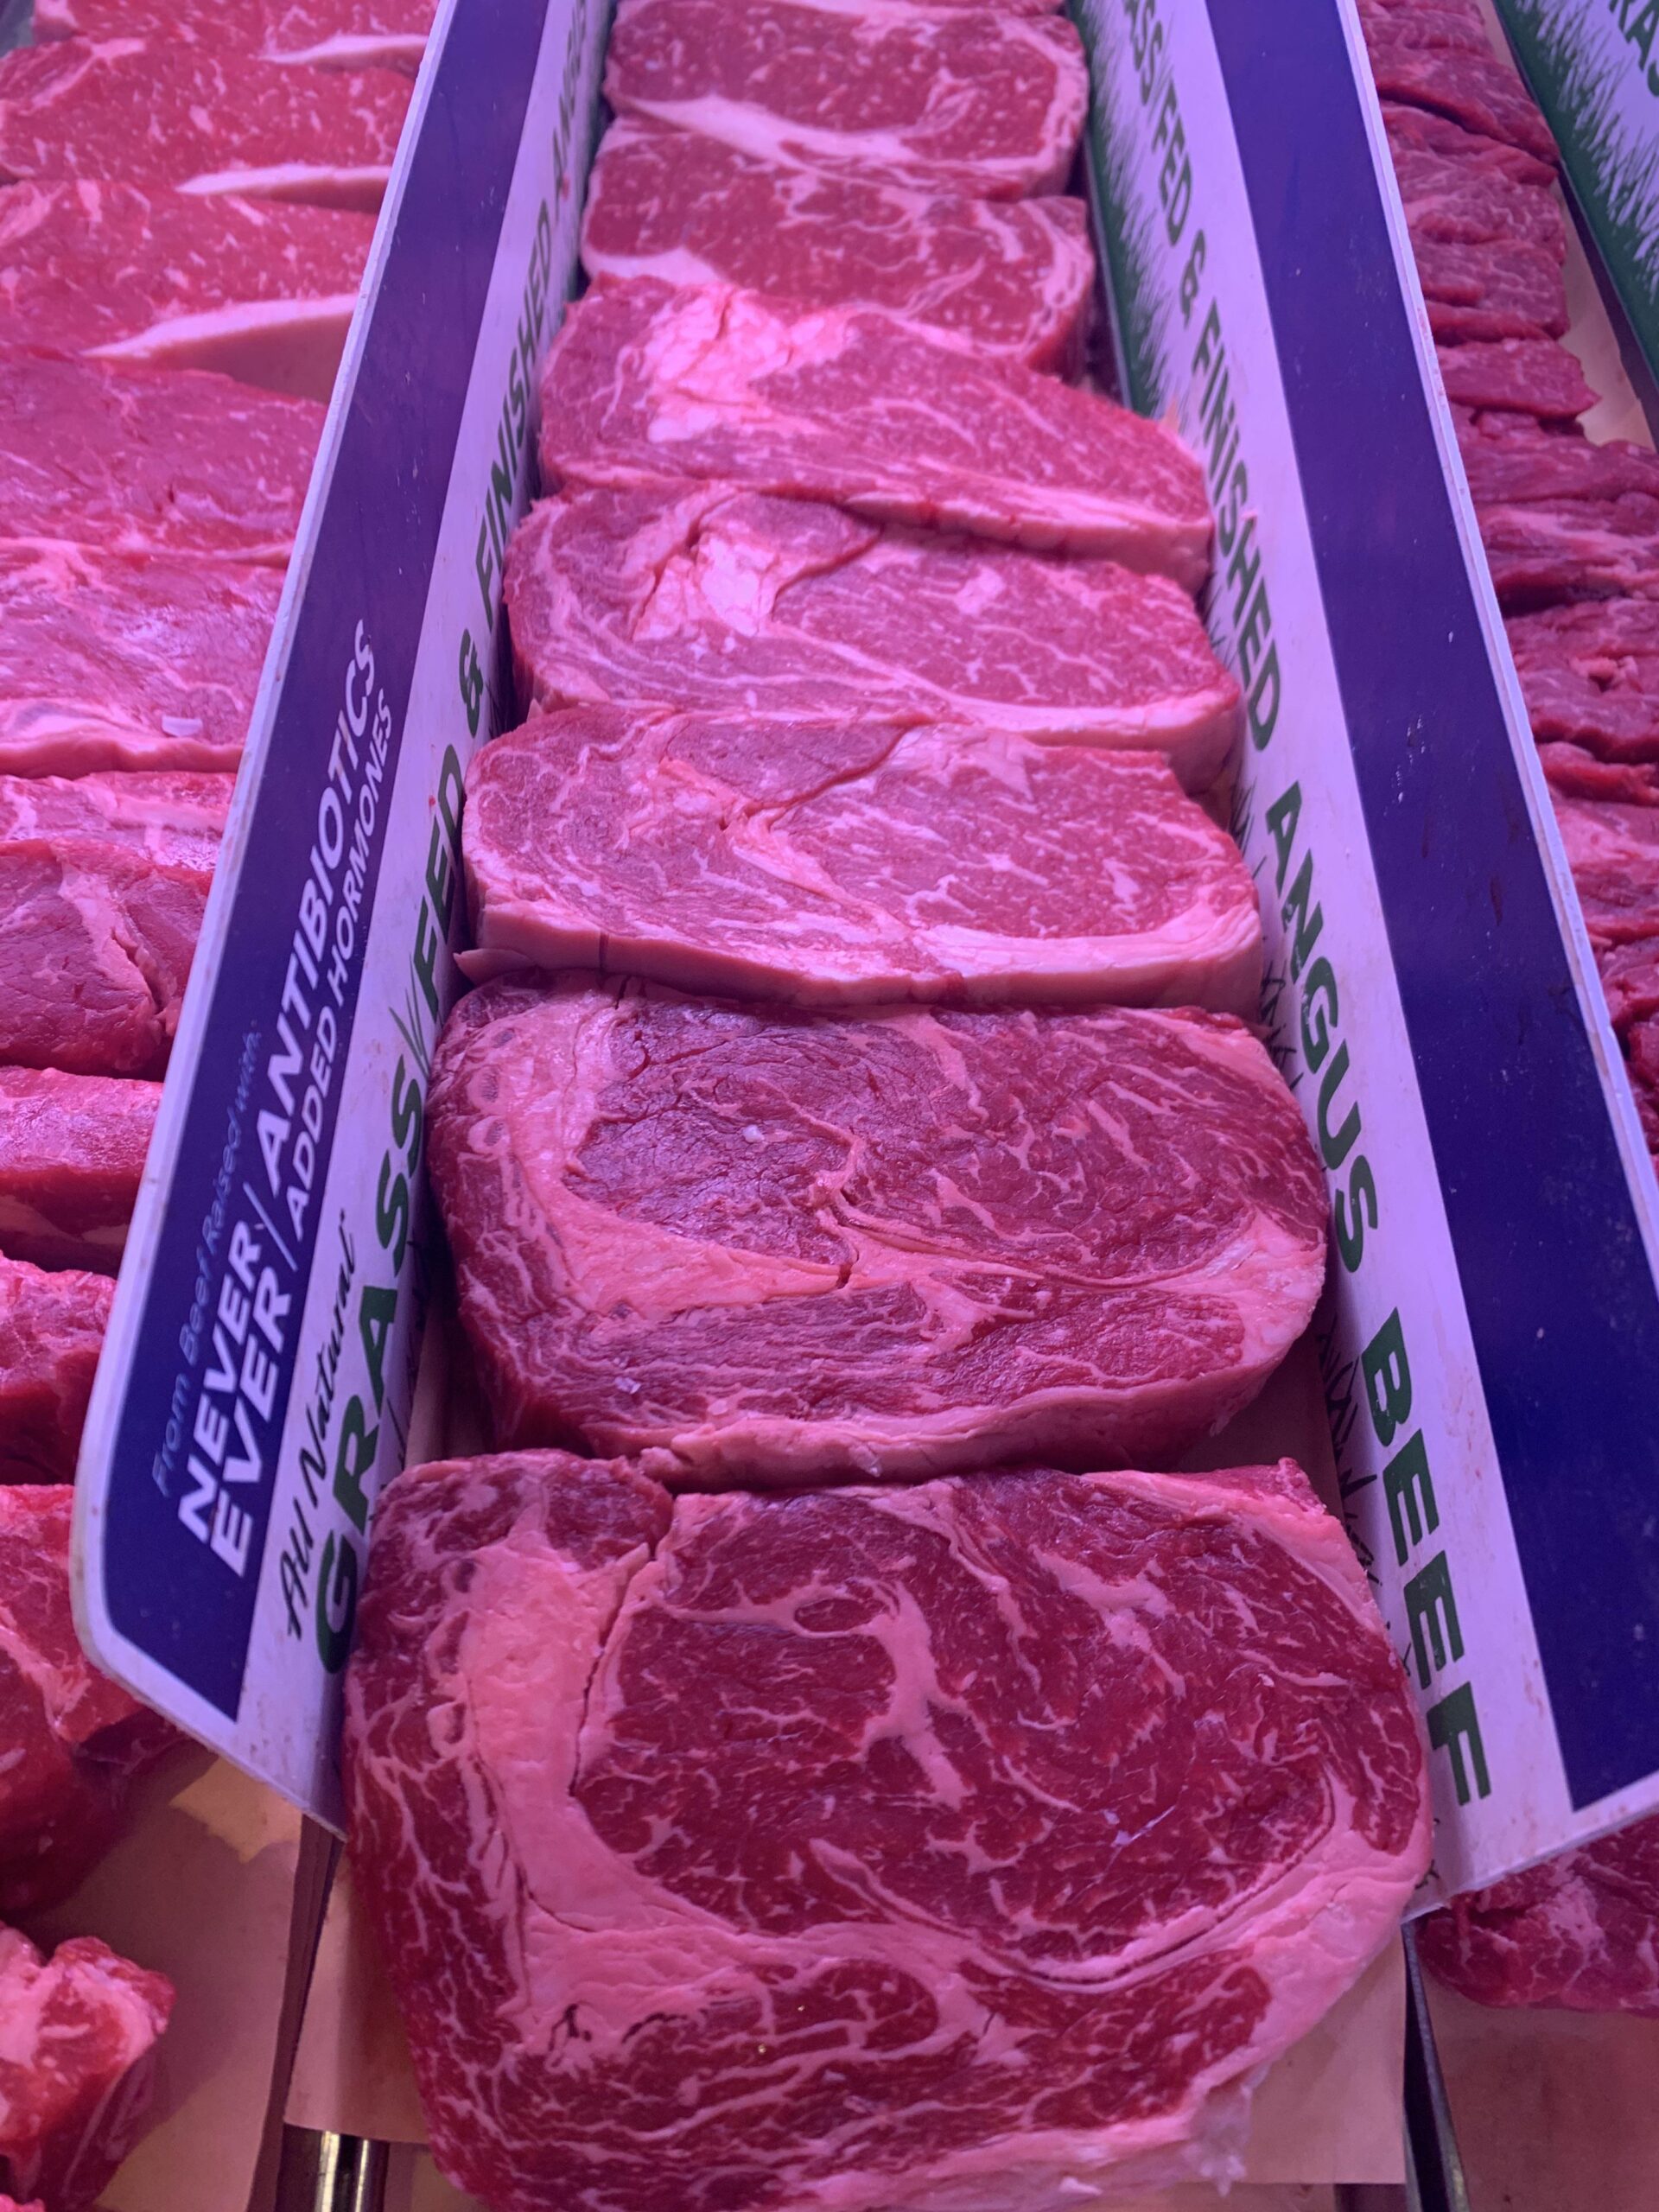 USDA Prime Ribeye at the shop, sold nearly 70 of these steaks today